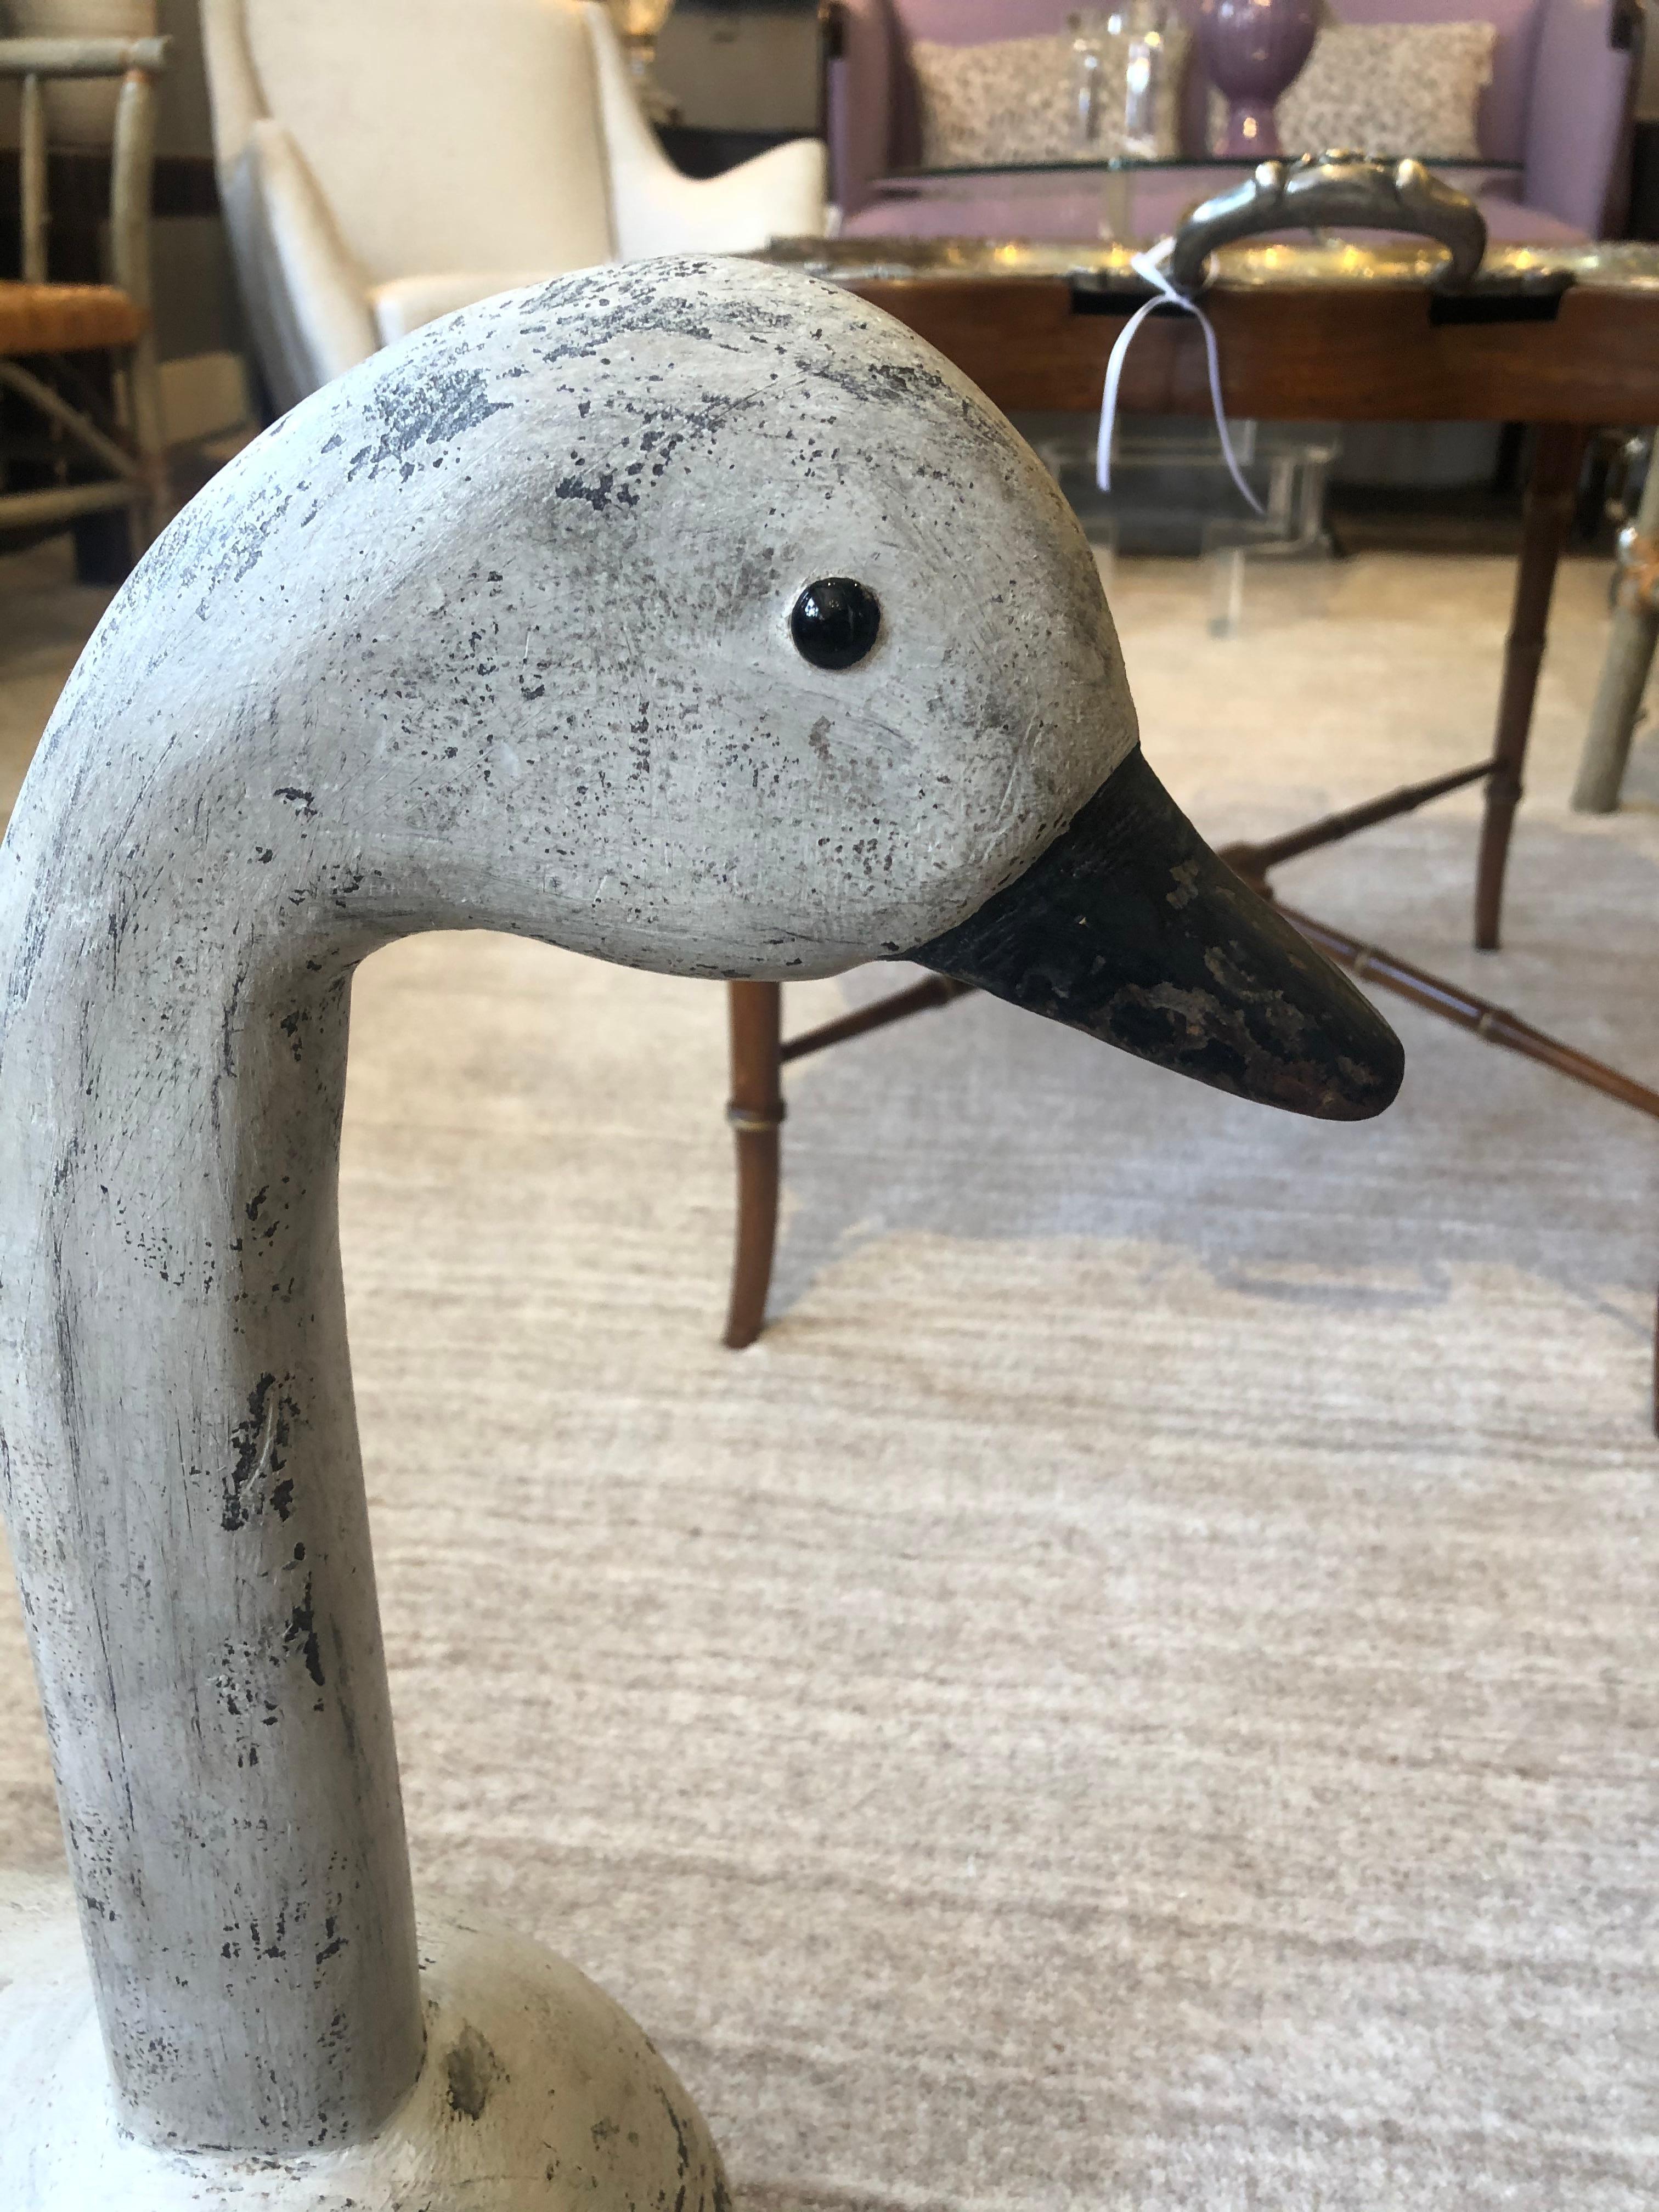 Classic country Folk Art swan decoy of impressive scale, made of painted carved wood and having a wonderful aged patina.